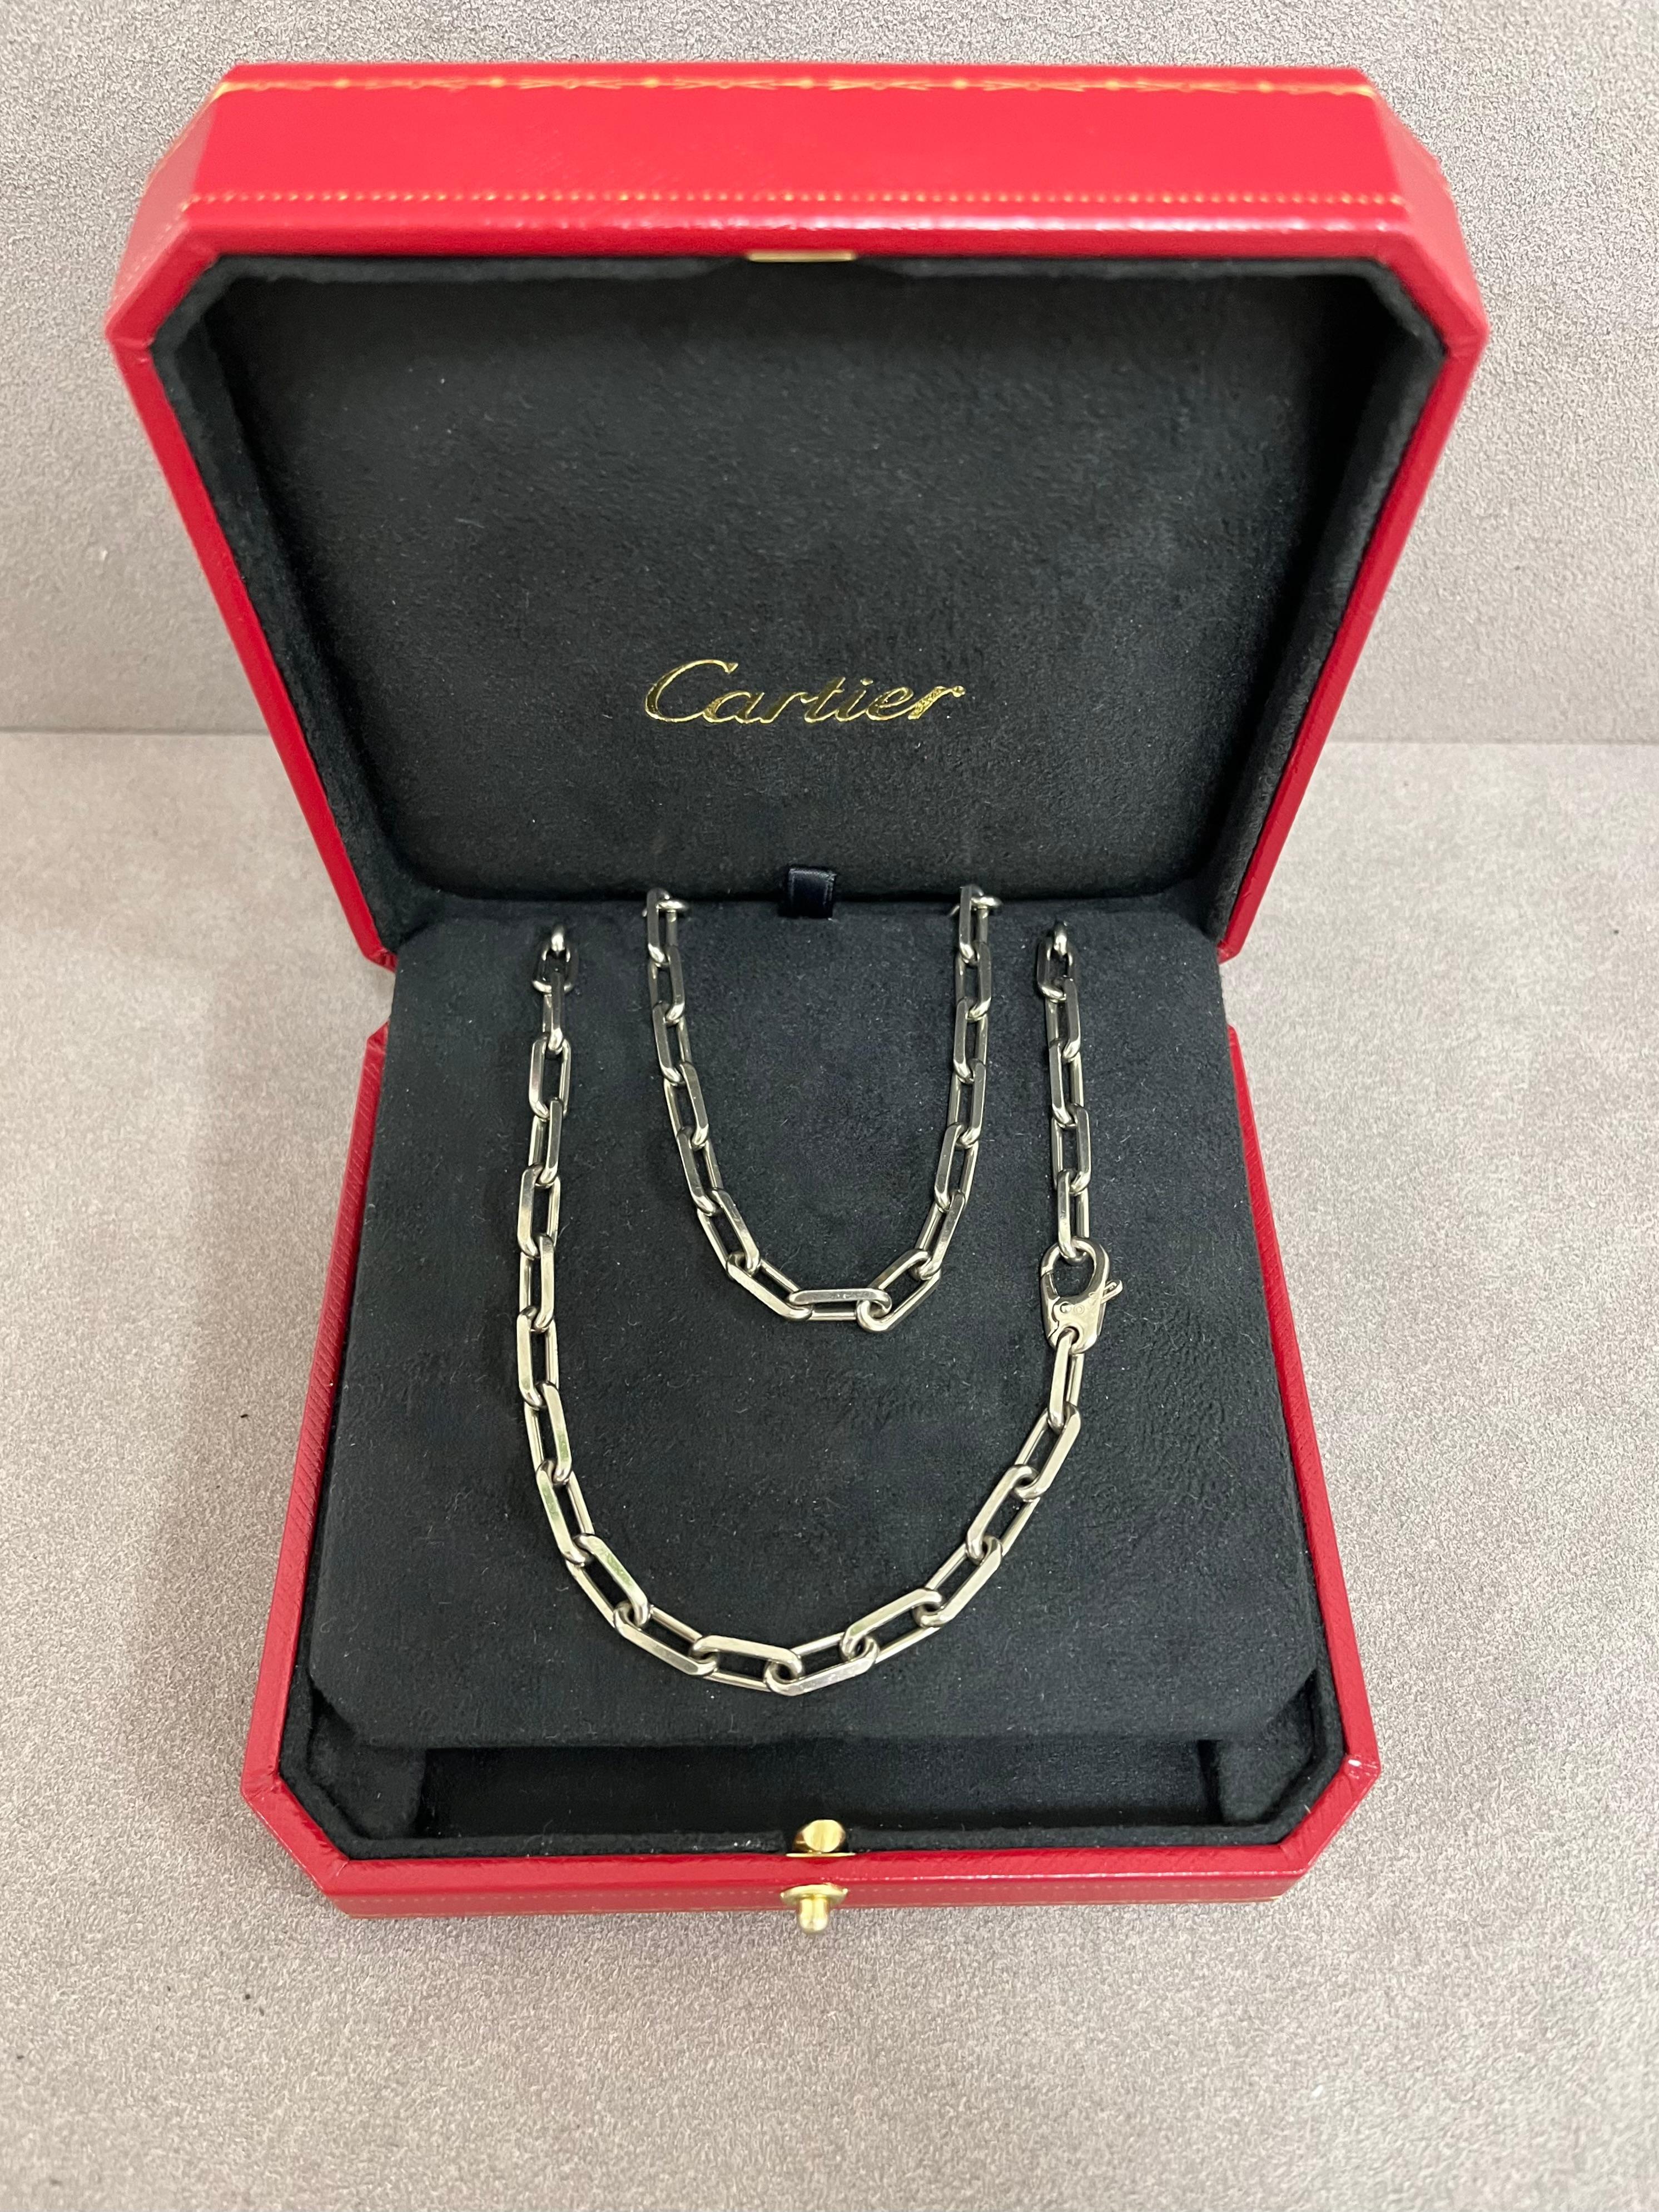 Necklace made of 18 kt. white gold signed Cartier.
This necklace belongs to the Santos de Cartier collection.
Handcrafted in non-rhodium-plated white gold.
Large model.

Weight: gr. 56.30
Length: 56.00 cm.
Original Box
c. 2023.

